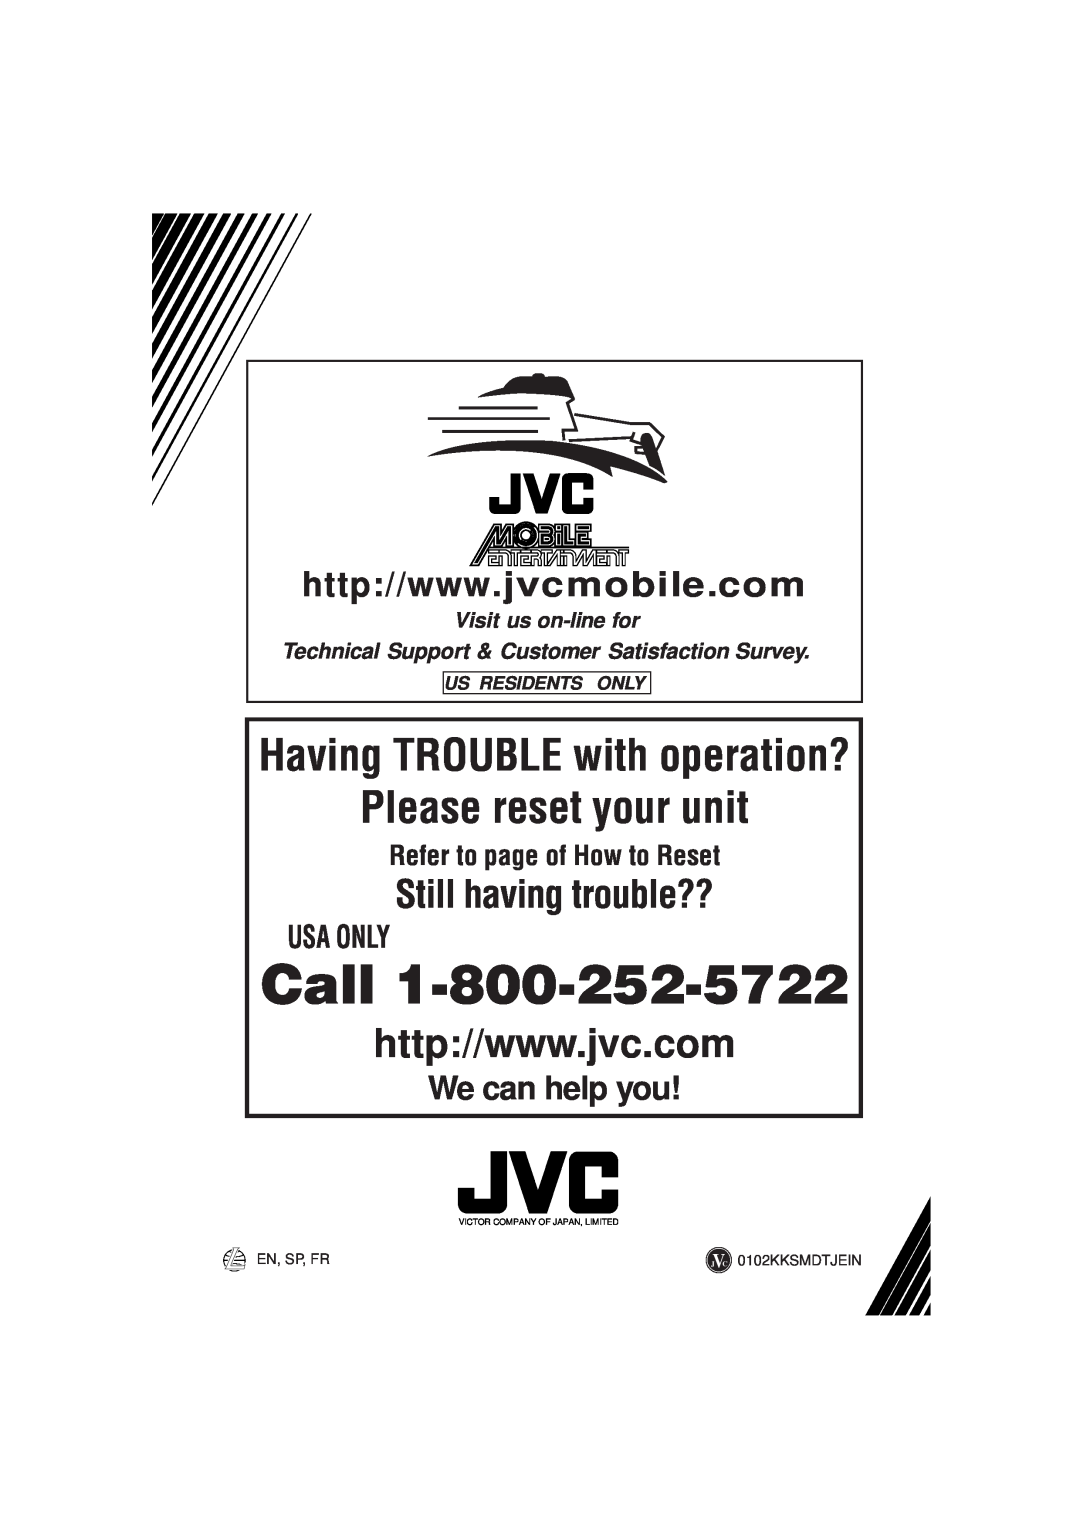 JVC KS-FX480J We can help you, Usa Only, Us Residents Only, Call, Please reset your unit, Having TROUBLE with operation? 